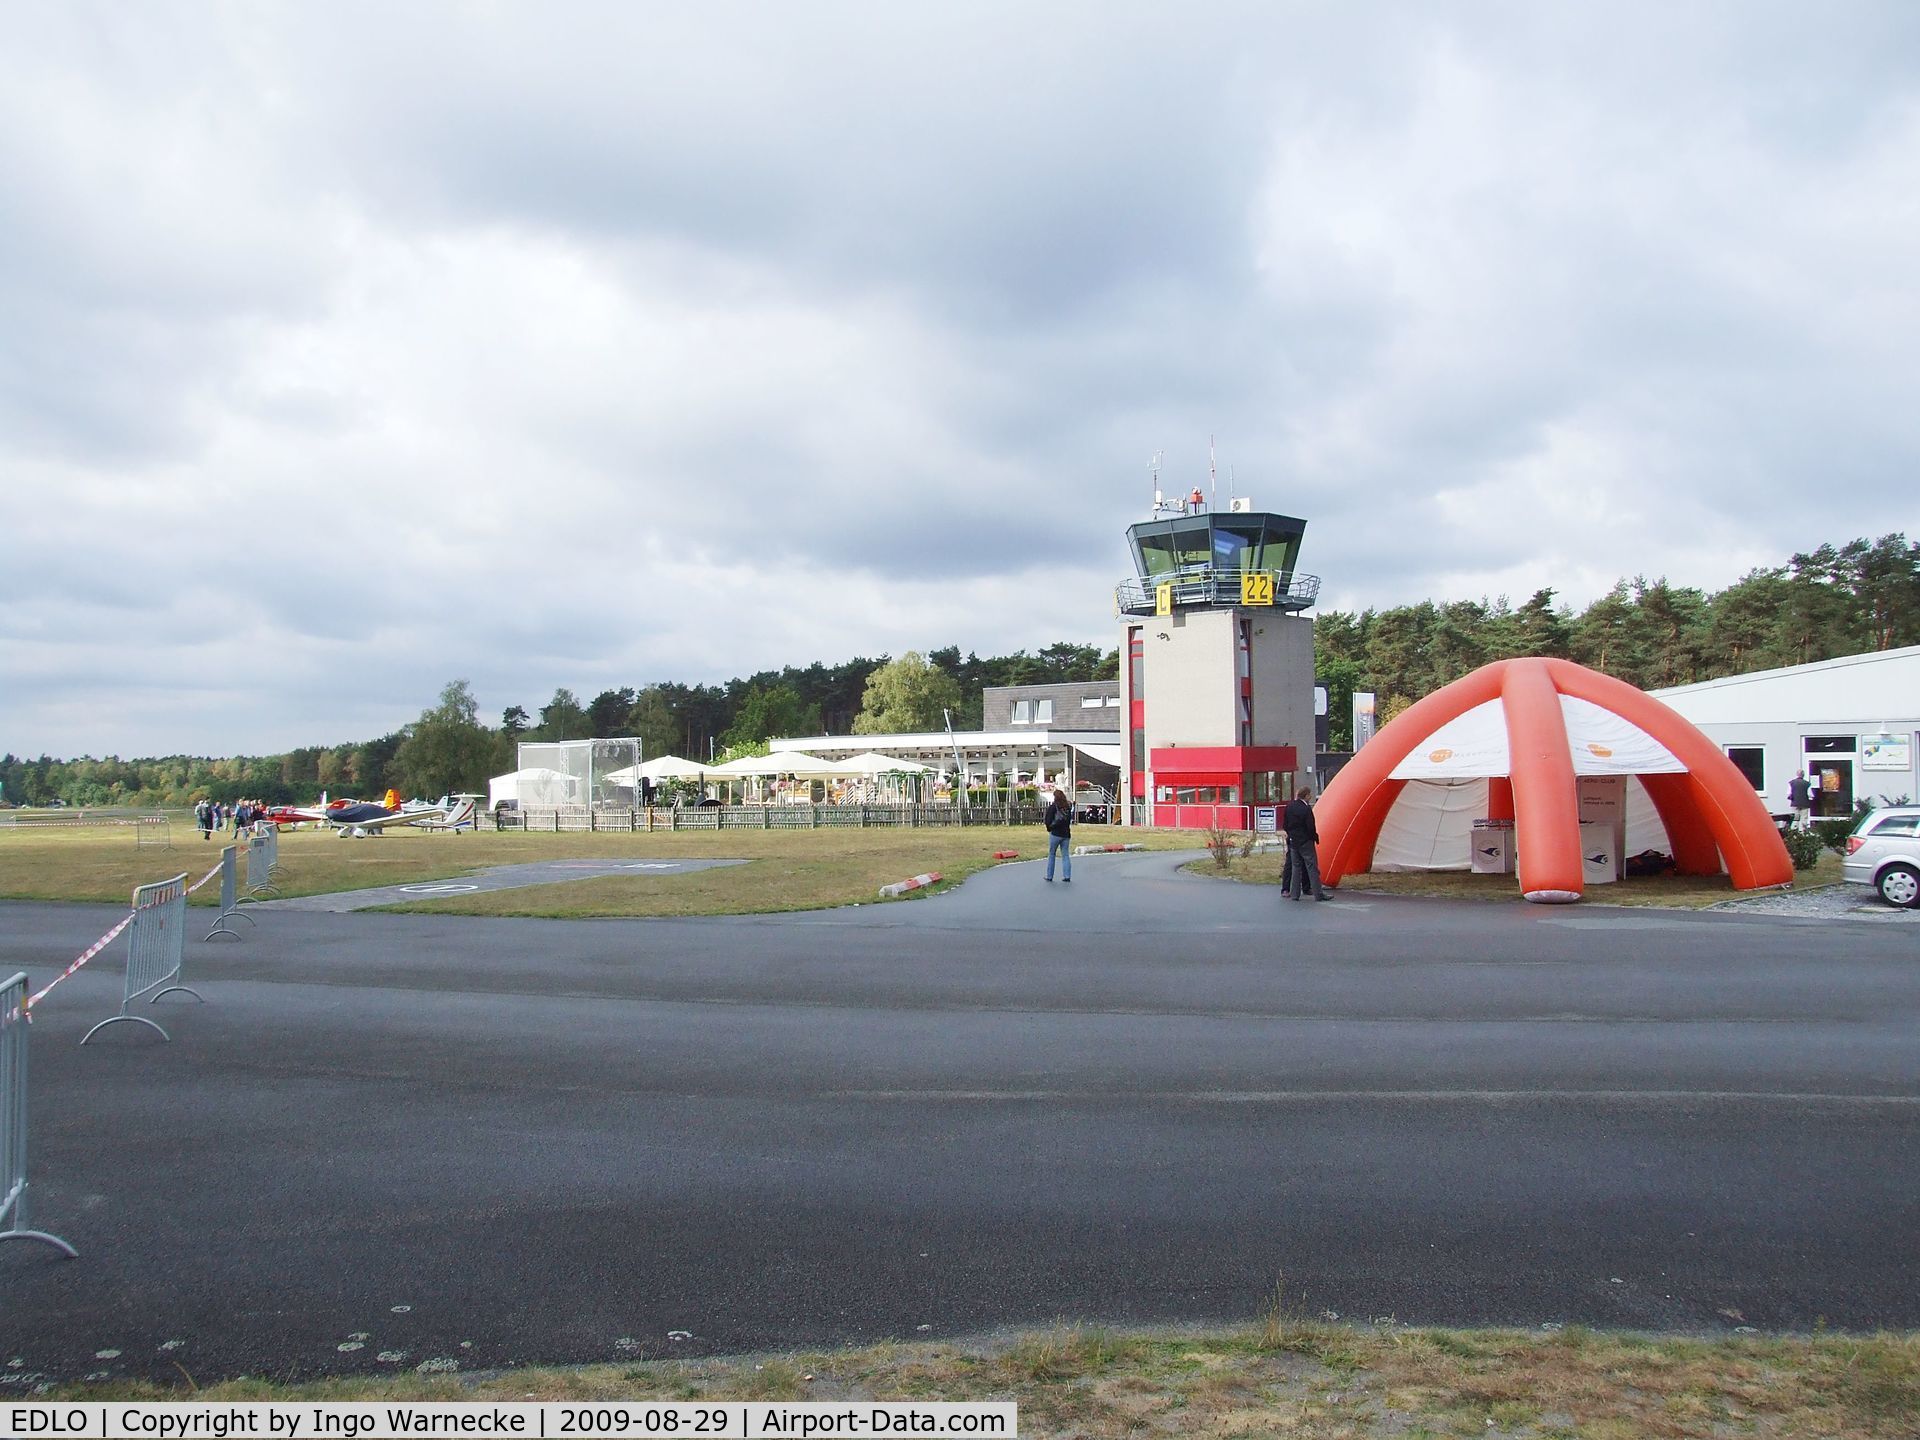 EDLO Airport - Oerlinghausen tower and airfield restaurant